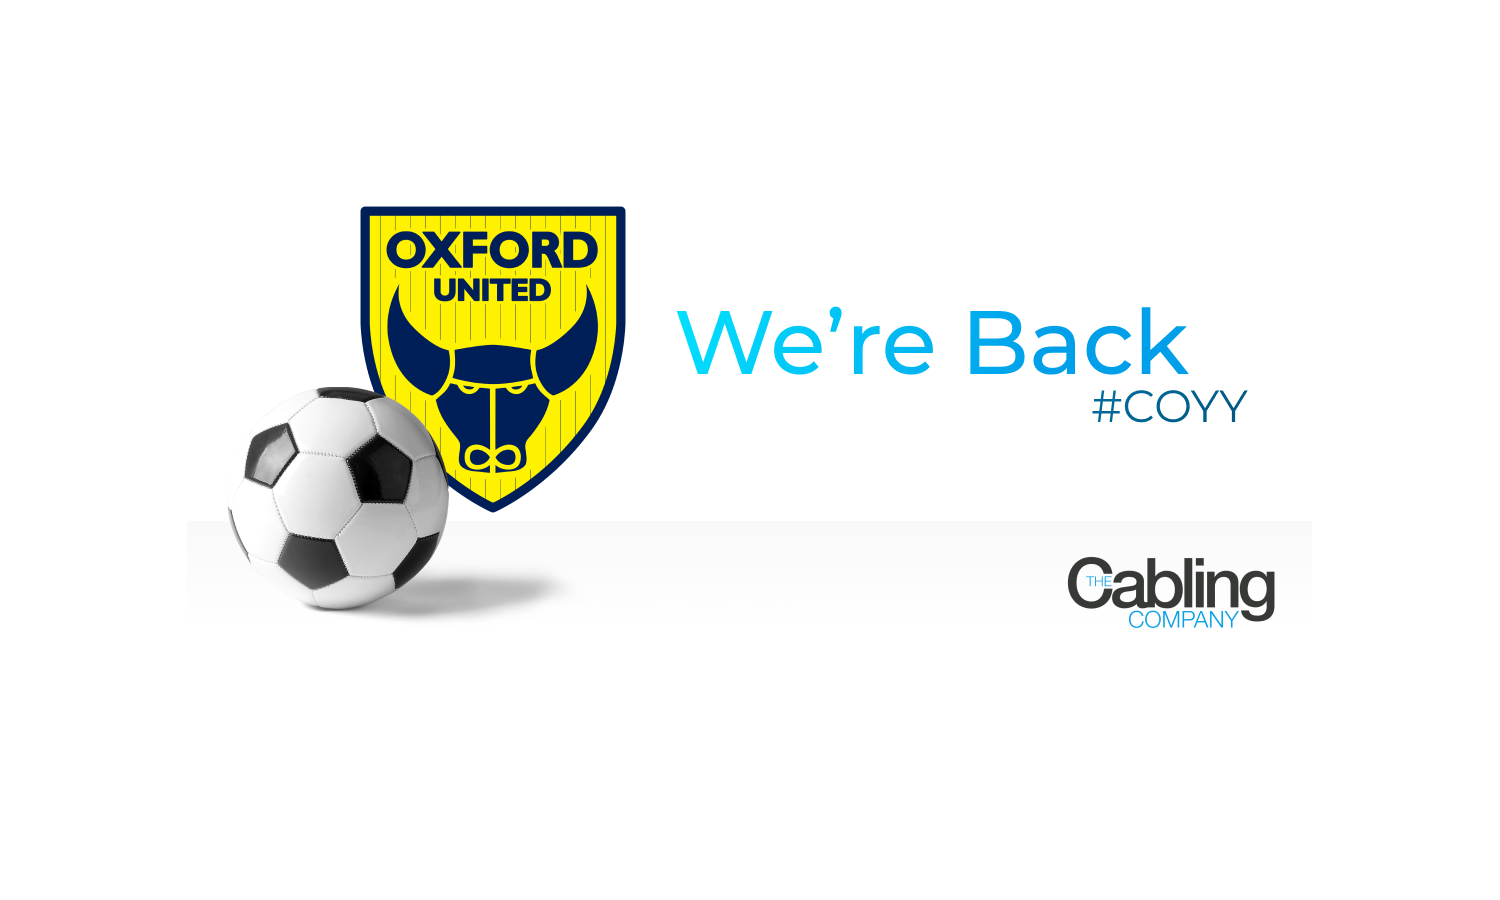 The Cabling Company return to sponsor Oxford United's Player of the Month award for the 2022/23 season